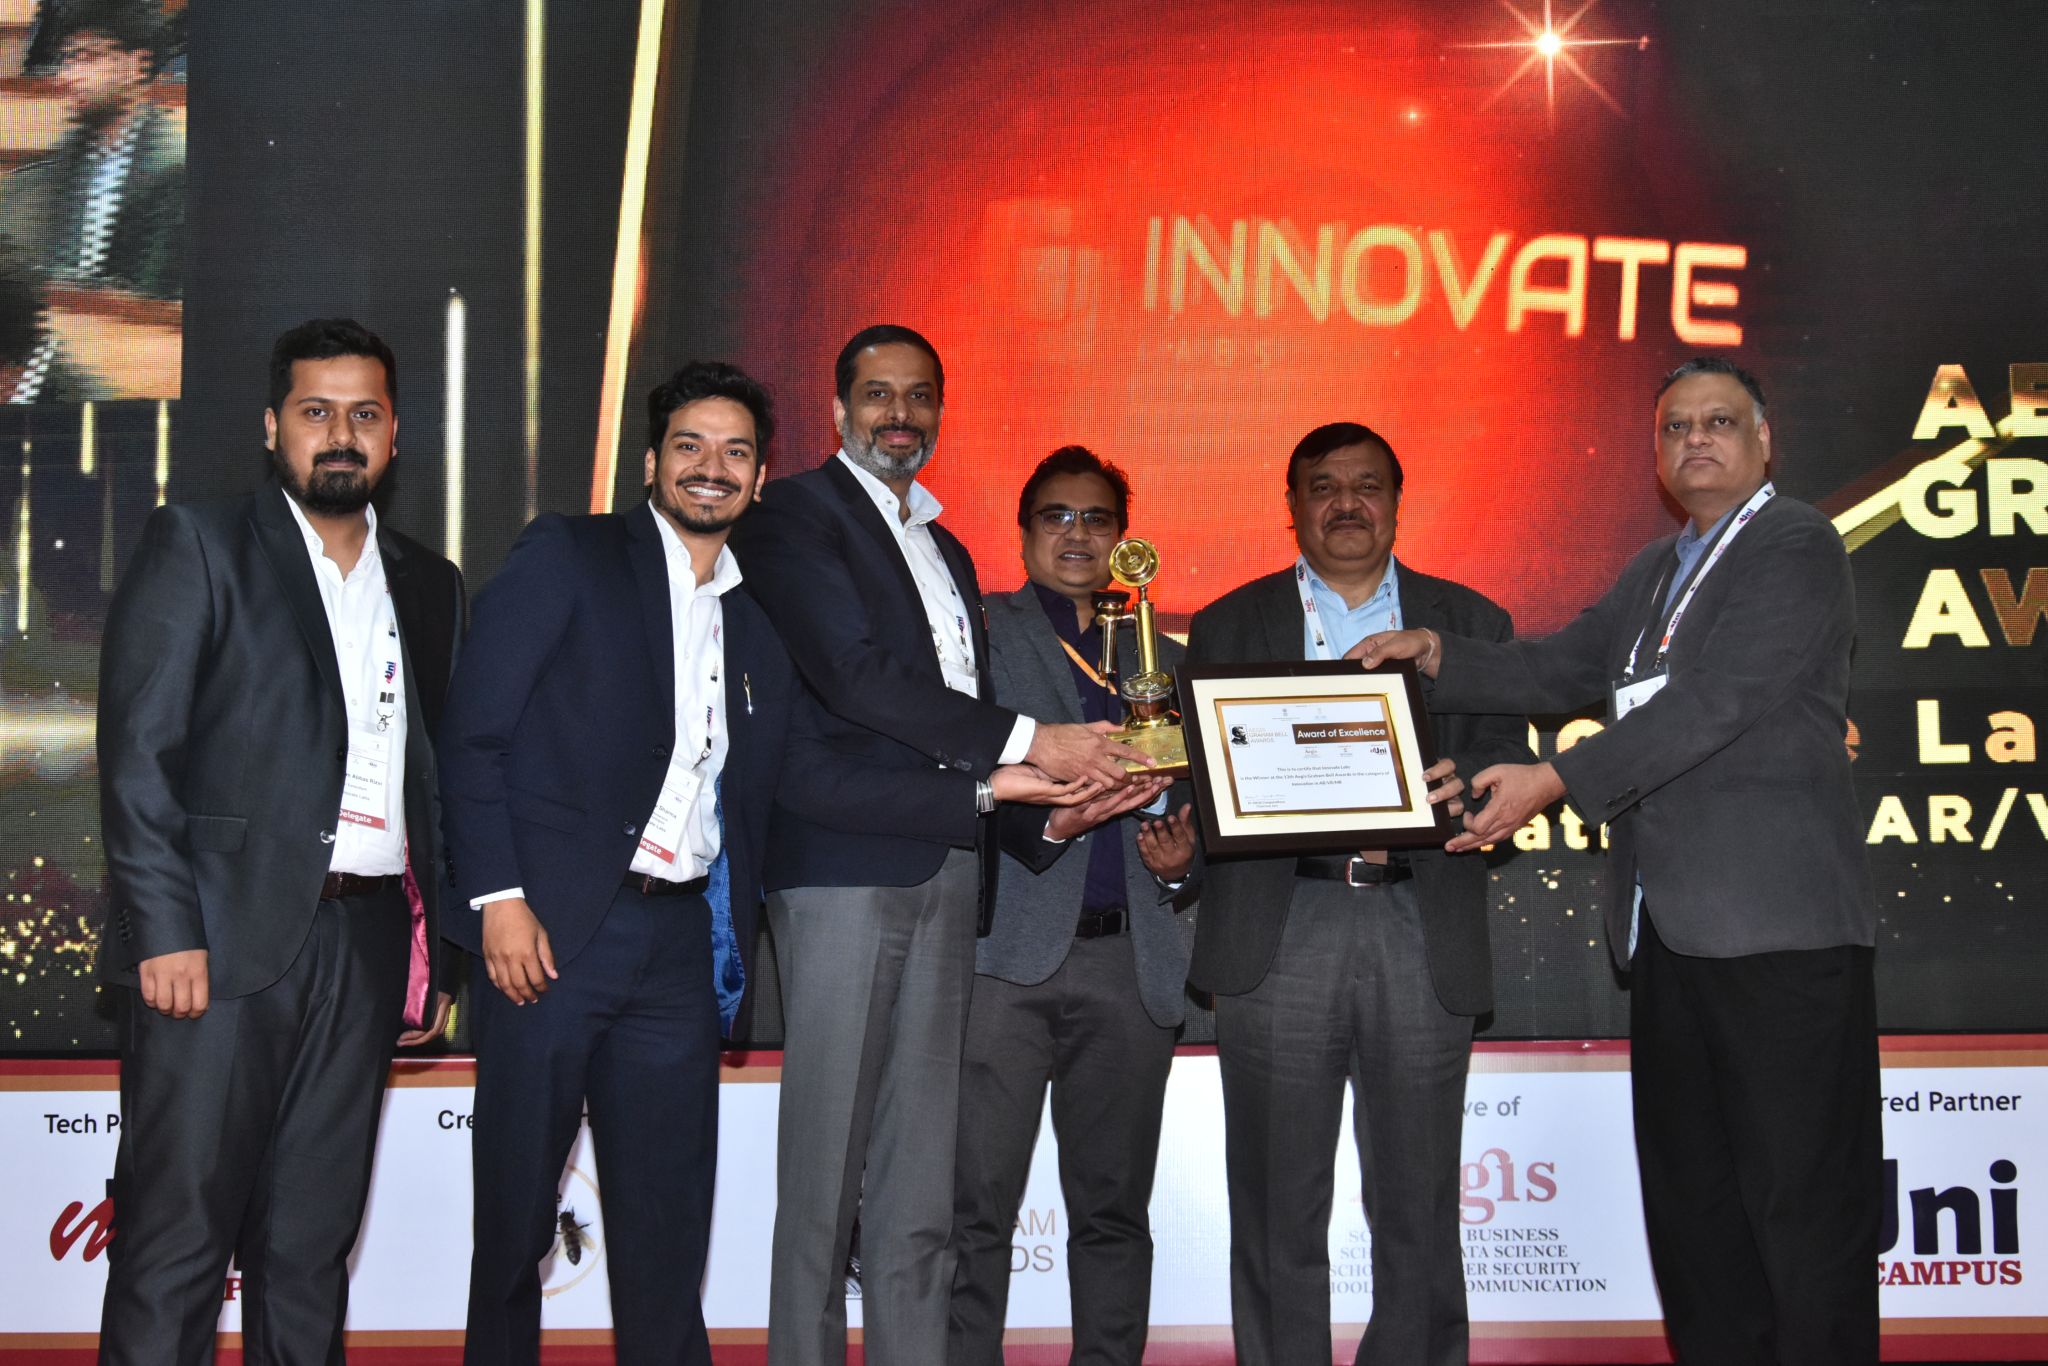 Innovate Labs Wins the Title of Best Innovation in AR/VR 